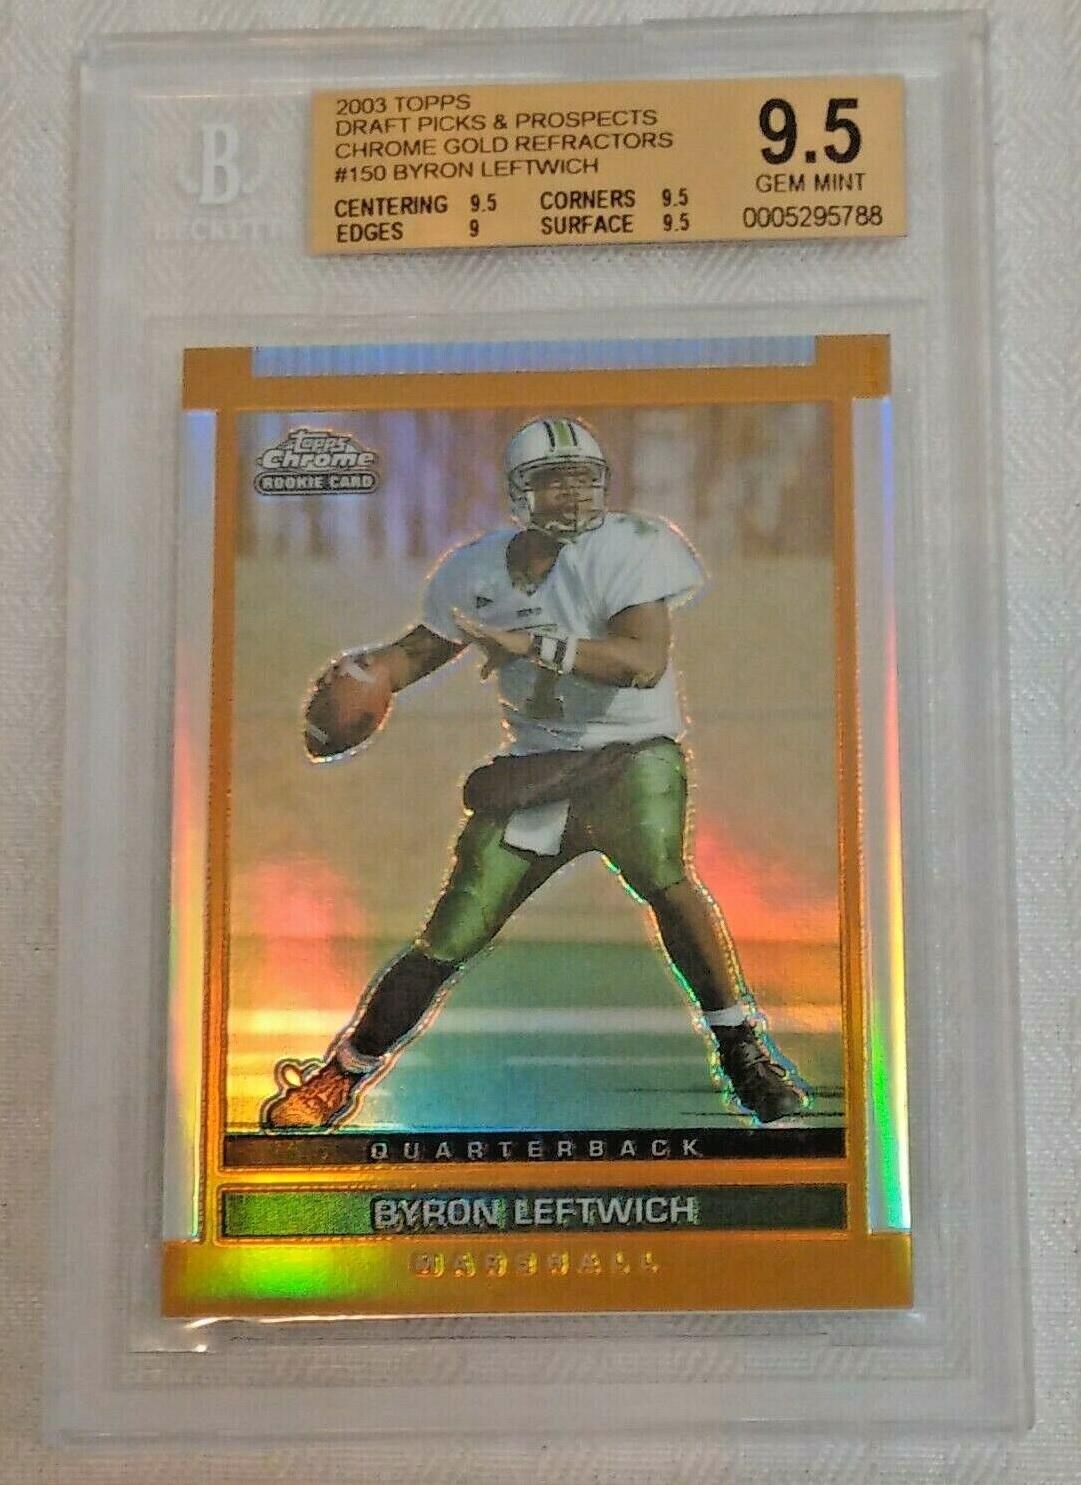 2003 Topps Chrome NFL Rookie Card RC Gold Refractor Insert #150 Byron Leftwich RC BGS 9.5 GEM MINT